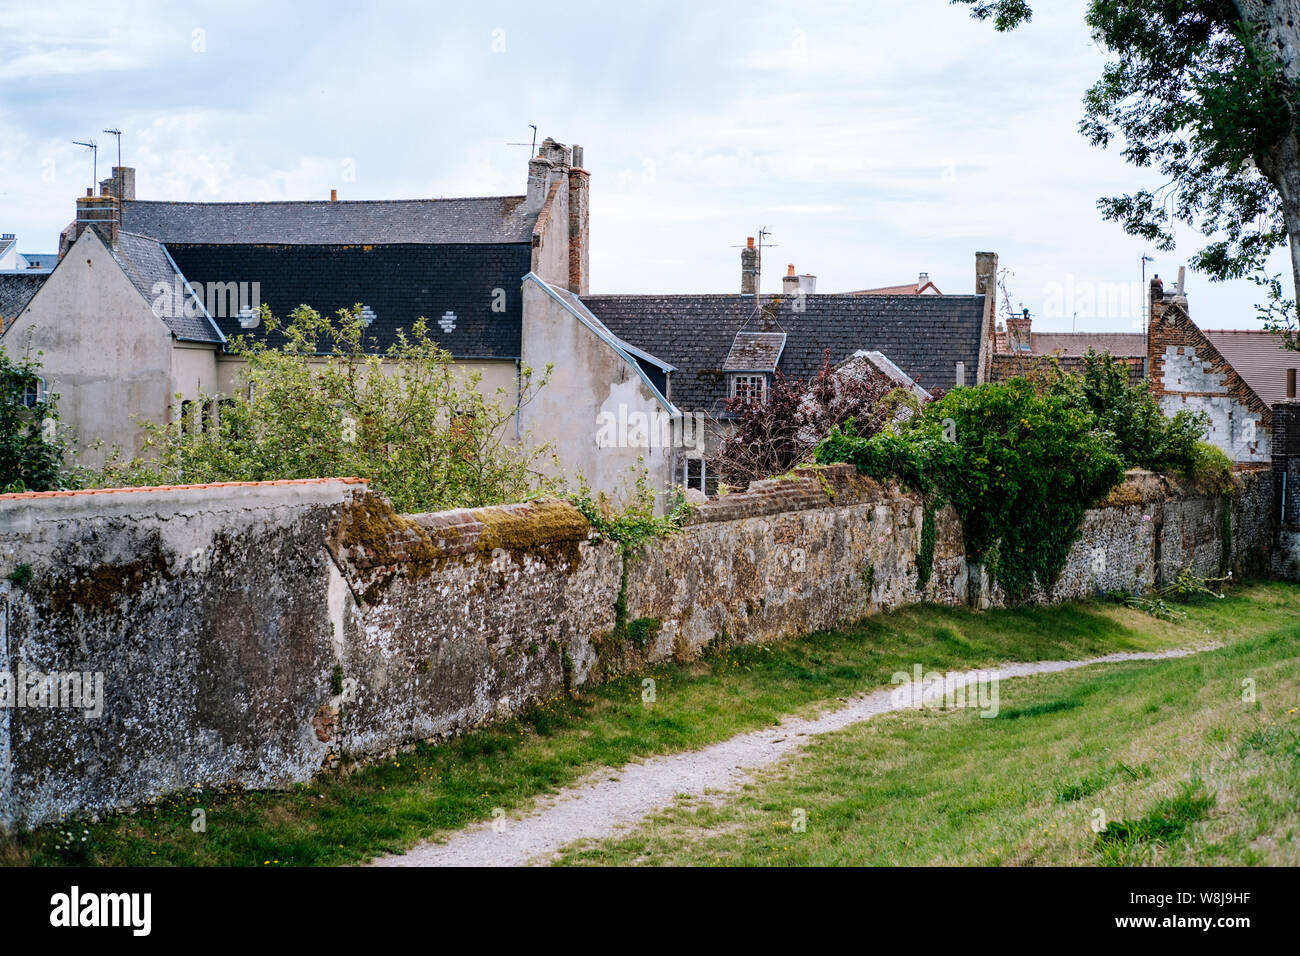 Traditional houses and city wall in Montreuil-sur-Mer, Pas-de-Calais region, Northern France Stock Photo